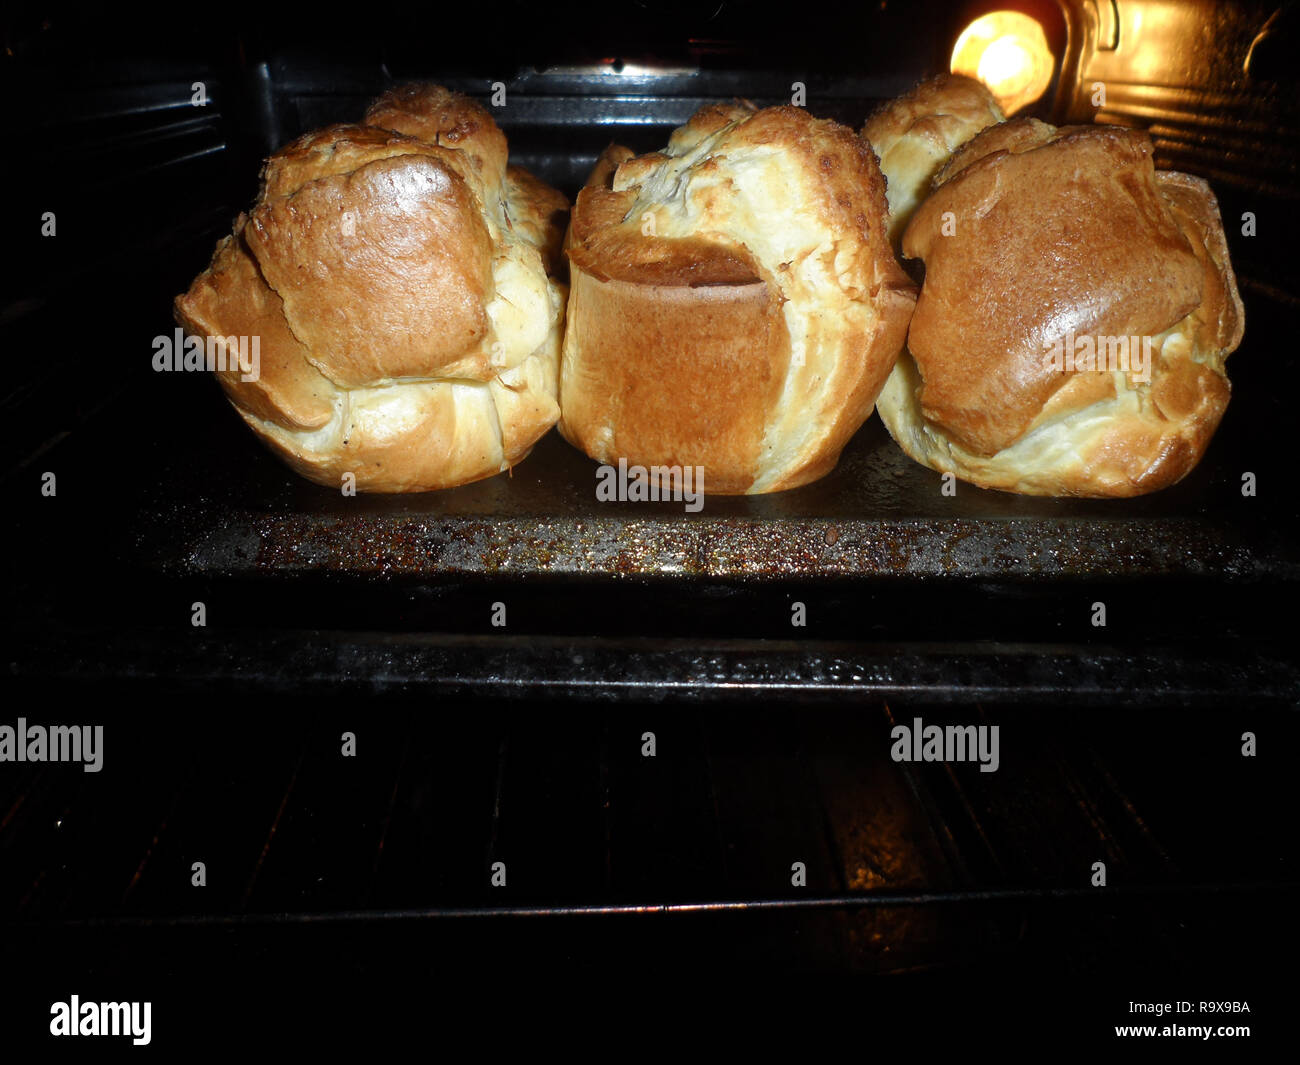 Yorkshire pudding in a Yorkshire pudding baking tin fresh from the oven made to a traditional Yorkshire recipe. Stock Photo